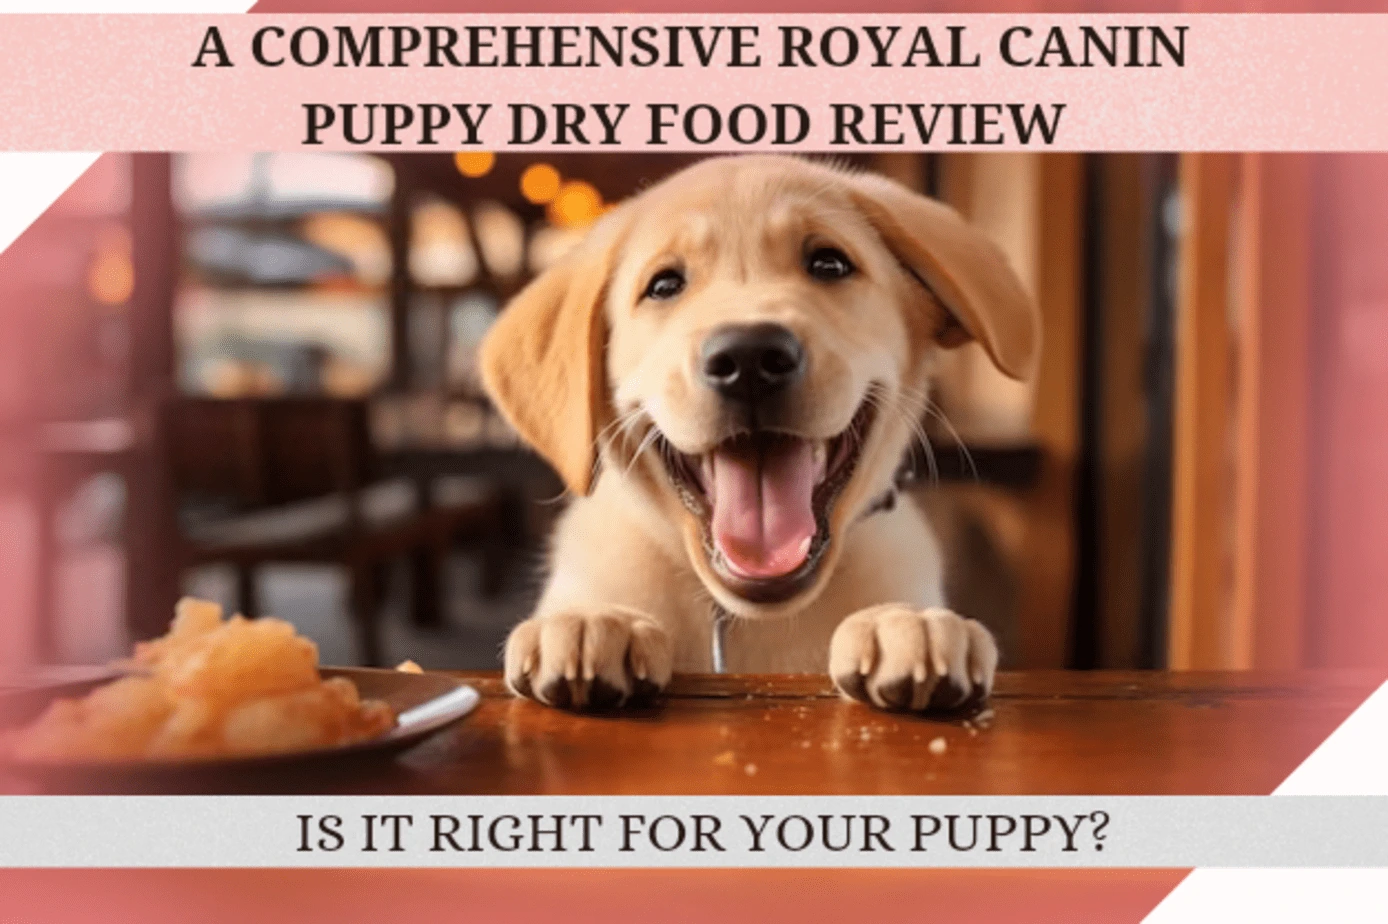 A Comprehensive Royal Canin Puppy Dry Food Review: Is It Right for Your Puppy?